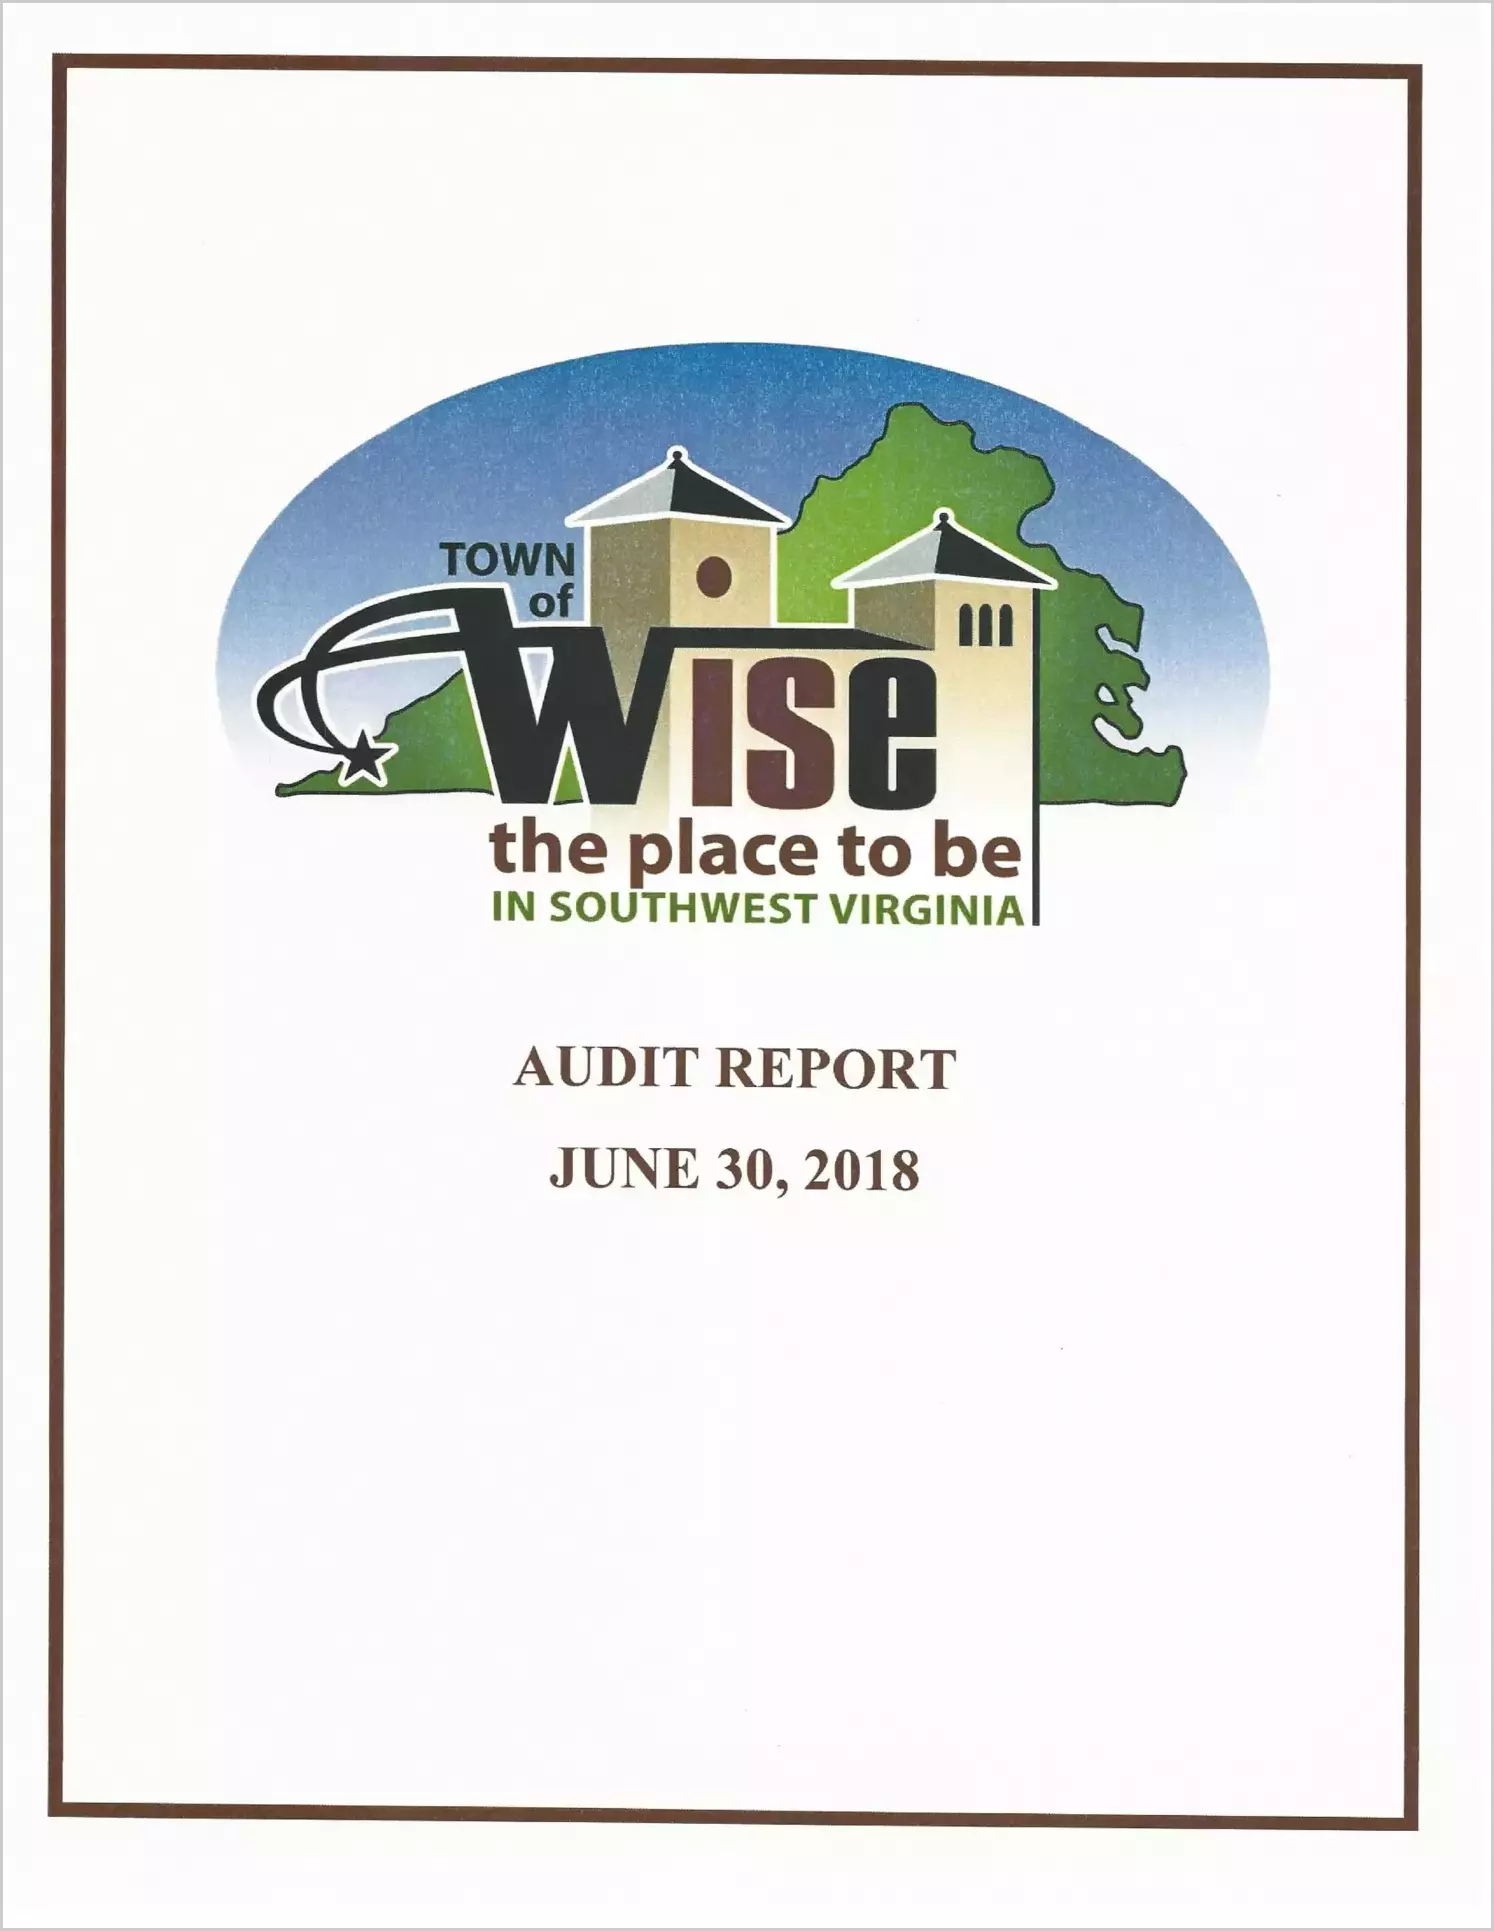 2018 Annual Financial Report for Town of Wise